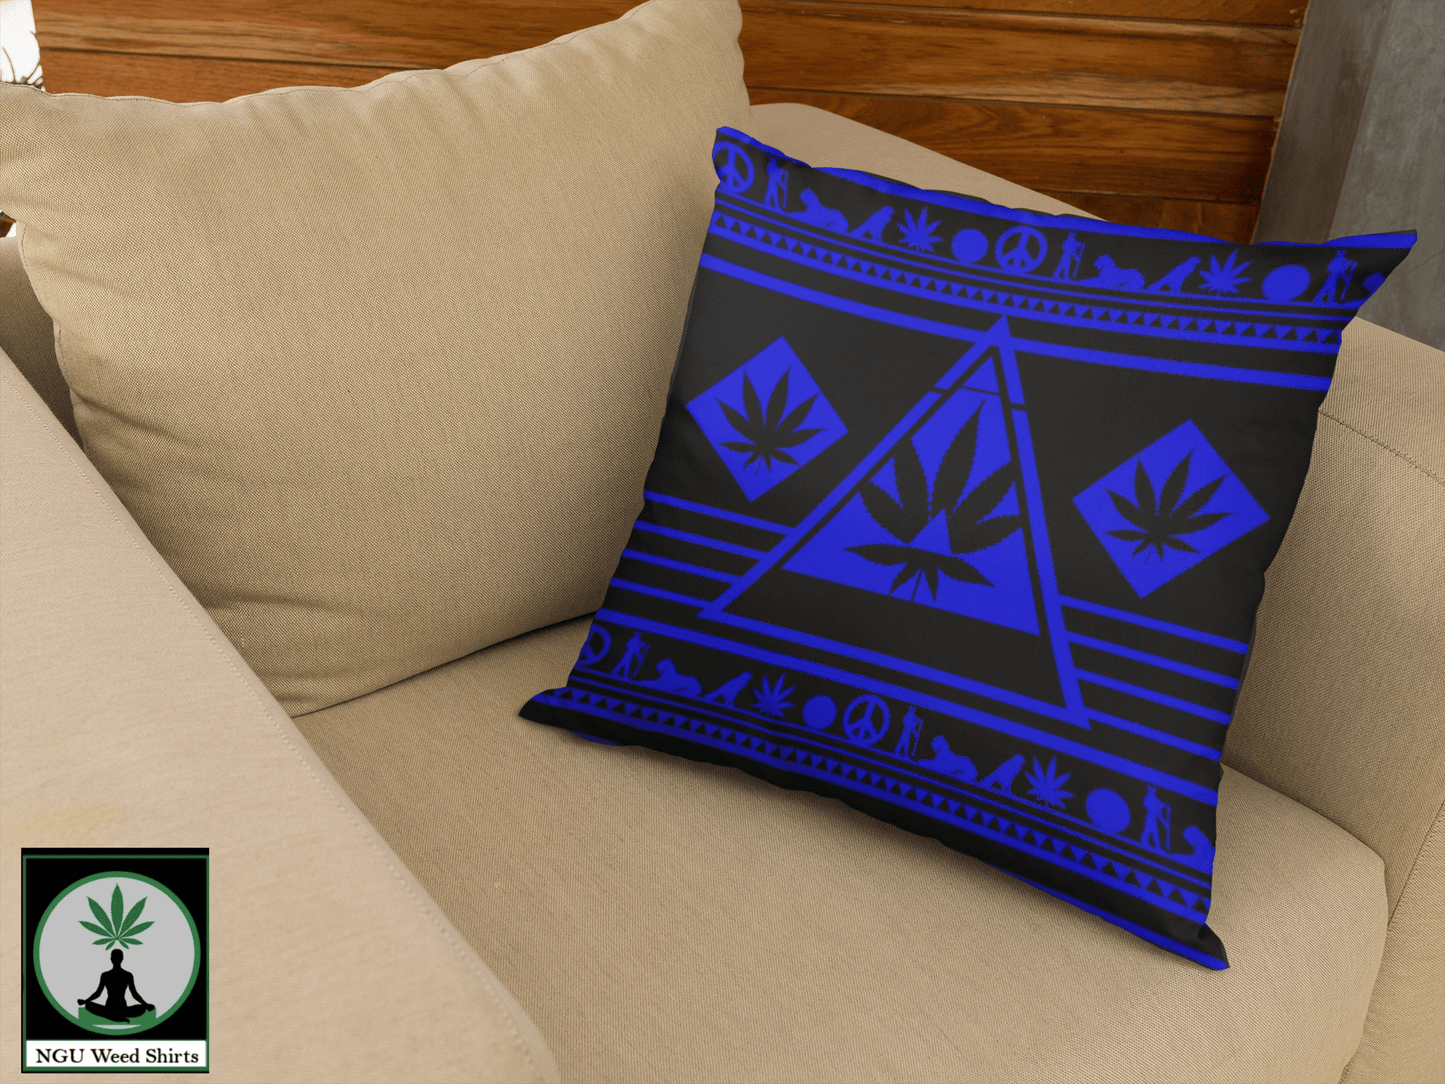 Chill in Style:  Royal Blue Throw Pillow with Dope Design! Get Cozy - Shop Now!